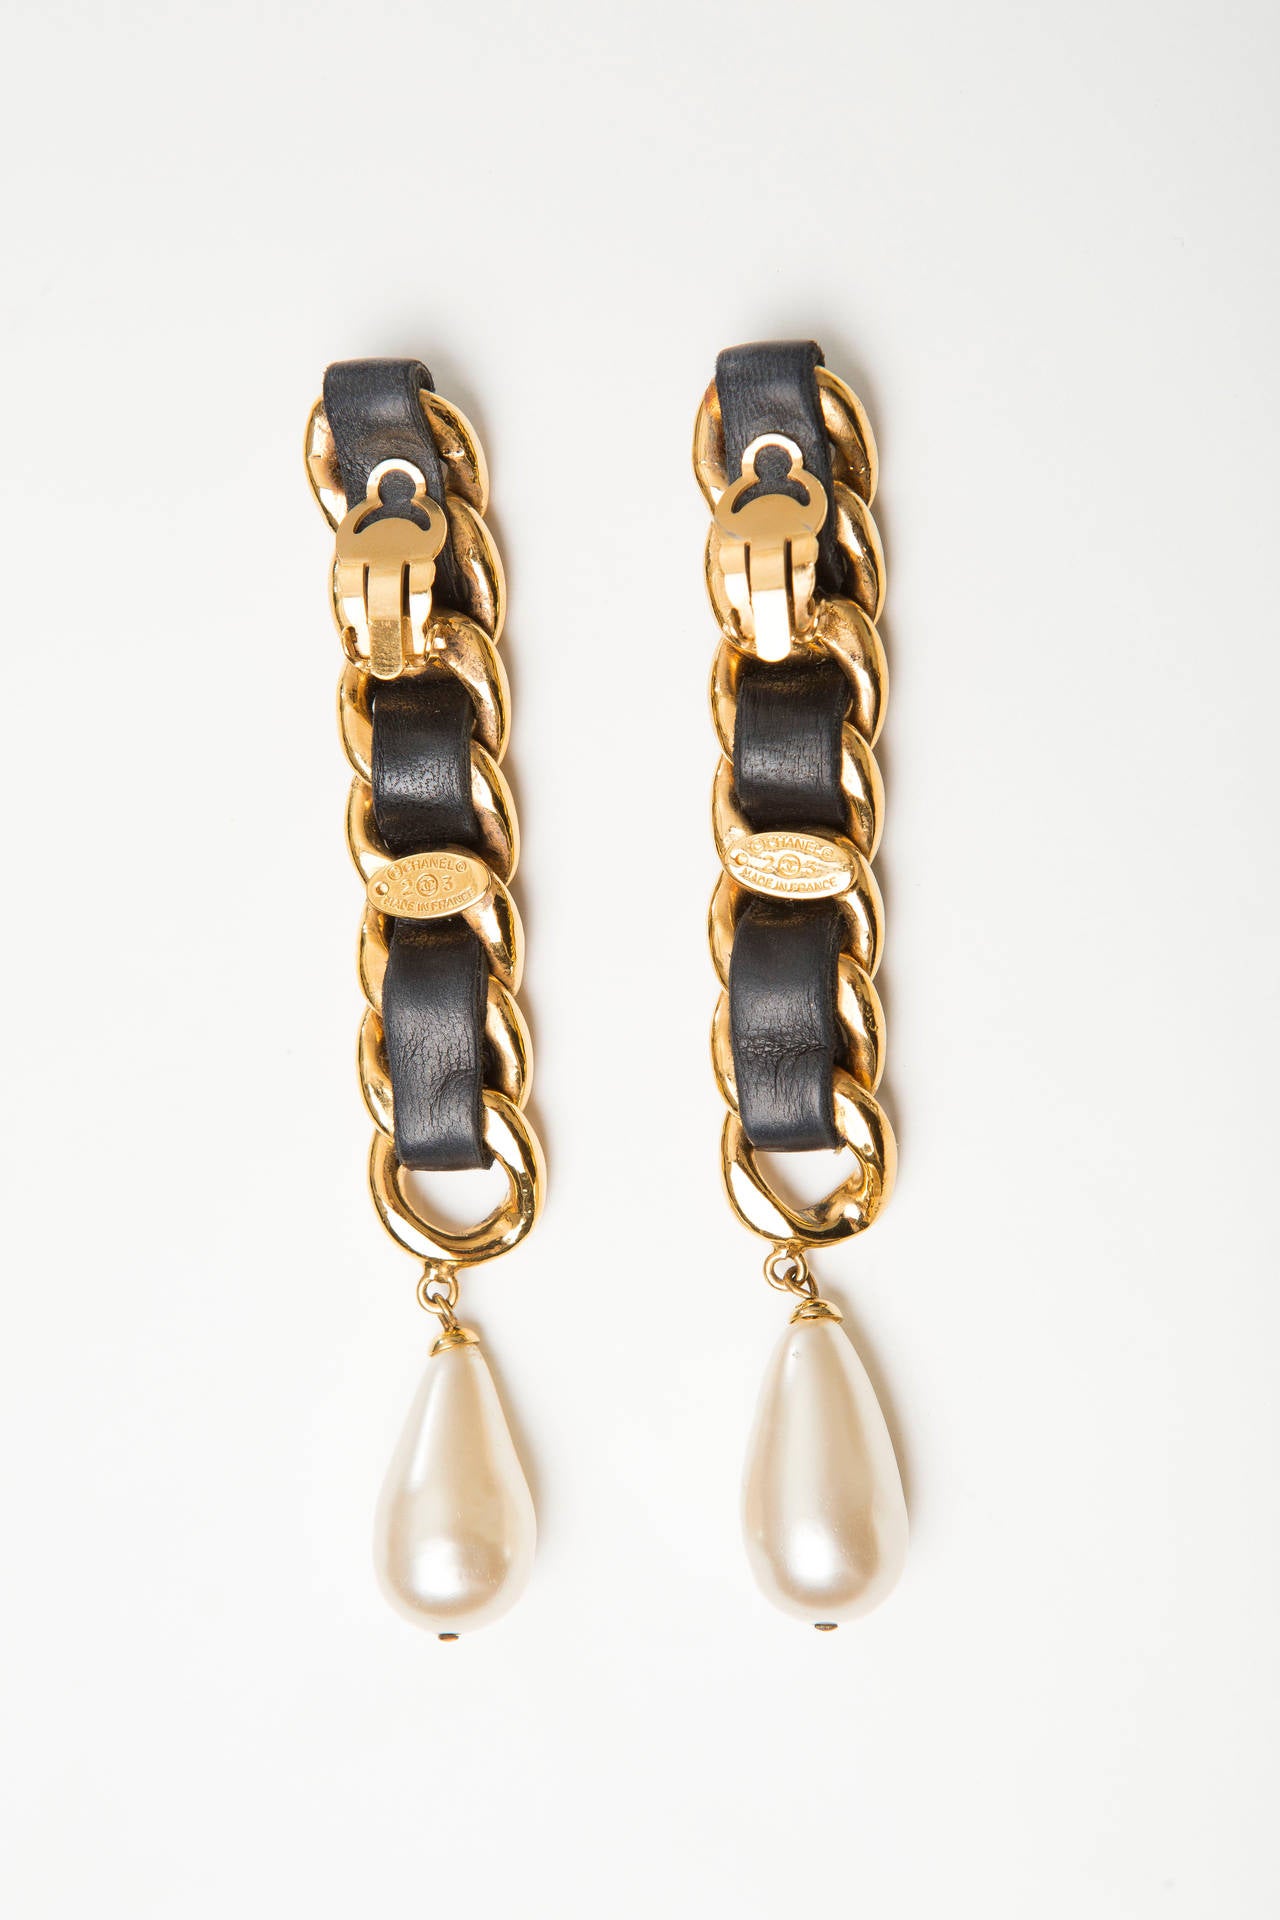 Chanel, Circa 1980s chain drop earrings with black leather trim, faux pearl and clip-on closure. Includes box.  Drop 4.5”, Width 0.63”